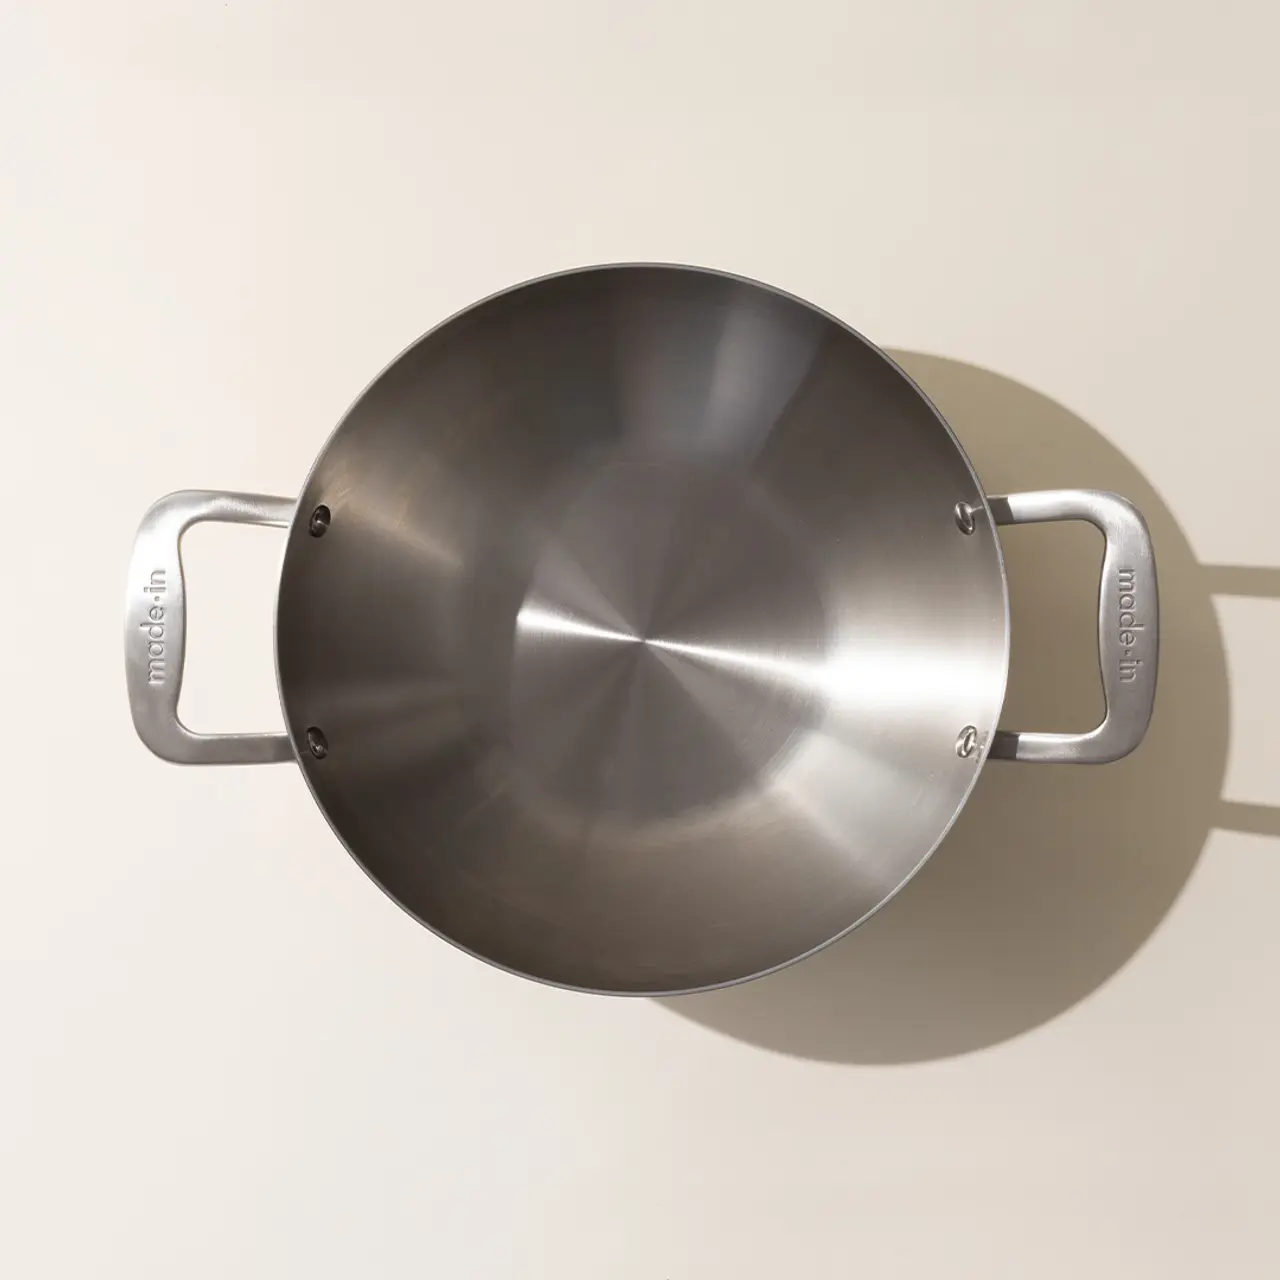 A stainless steel pot with two handles viewed from above on a neutral background.